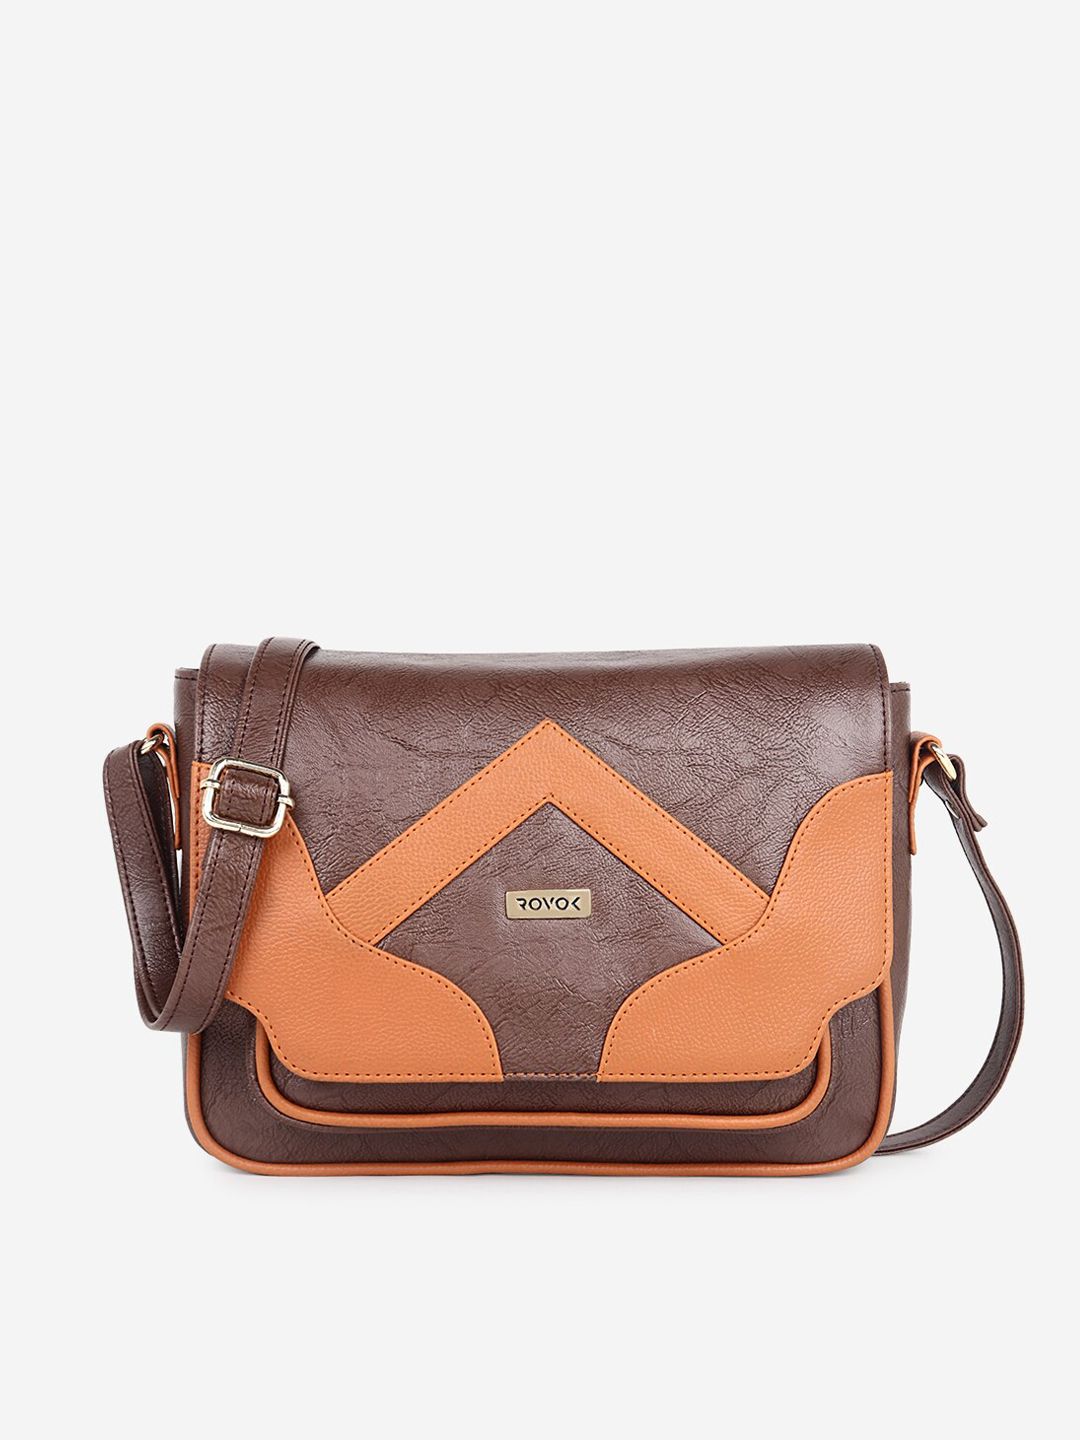 ROVOK Brown Colourblocked PU Structured Sling Bag Price in India